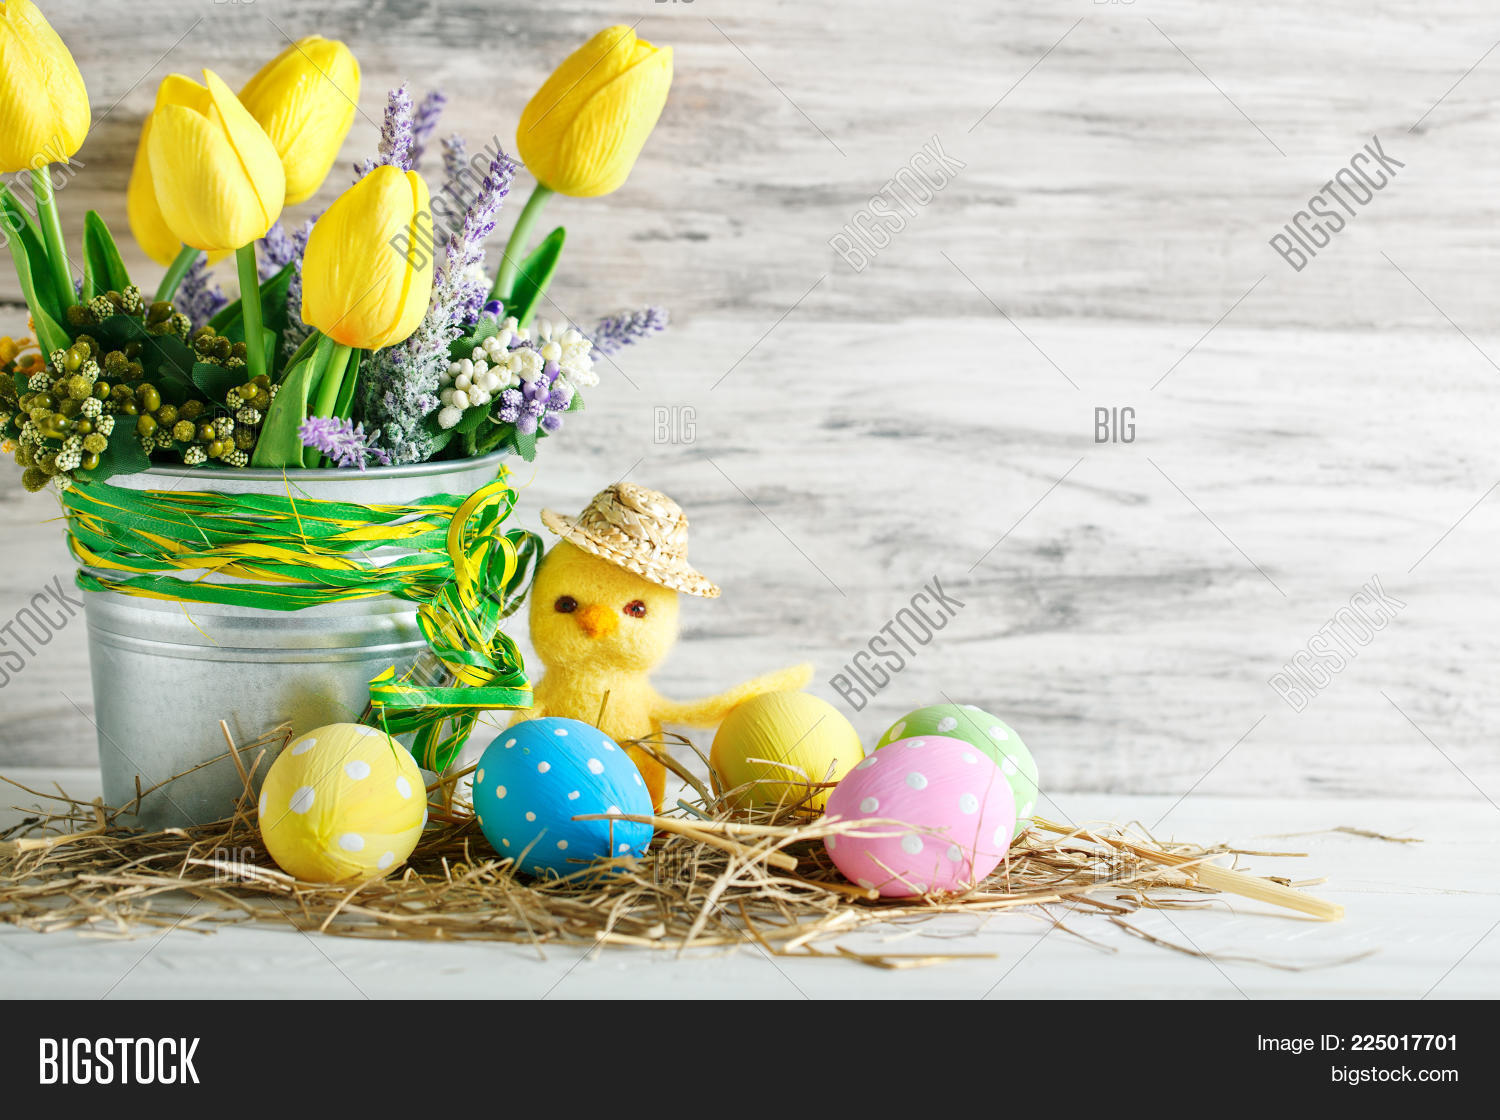 Happy Easter Image Photo Free Trial Bigstock